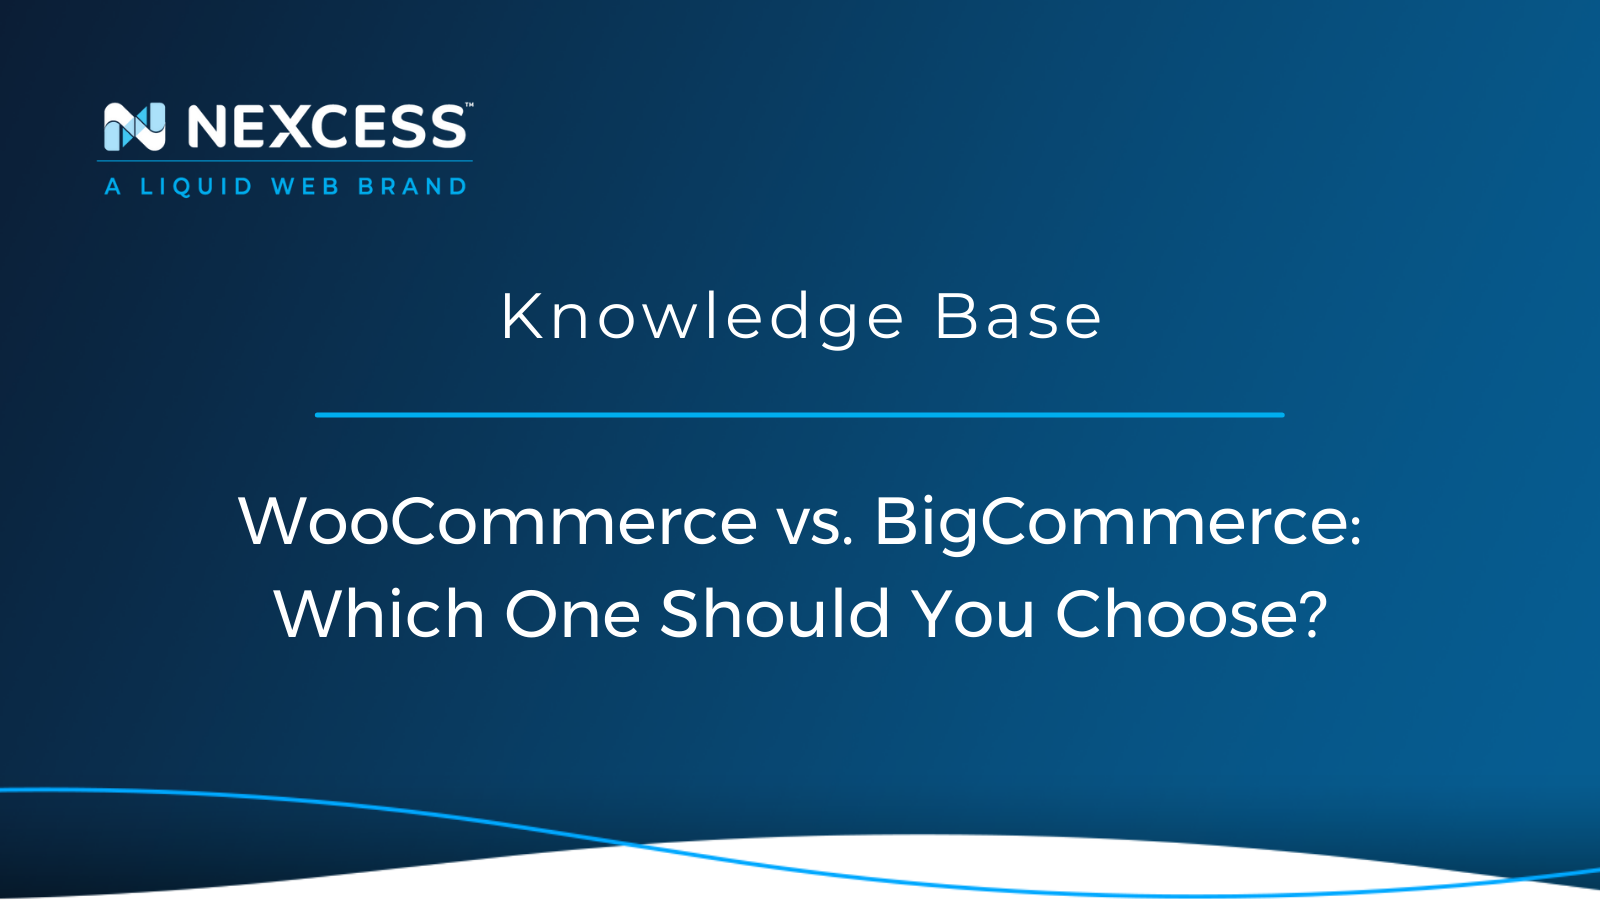 WooCommerce vs. BigCommerce: Which One Should You Choose?